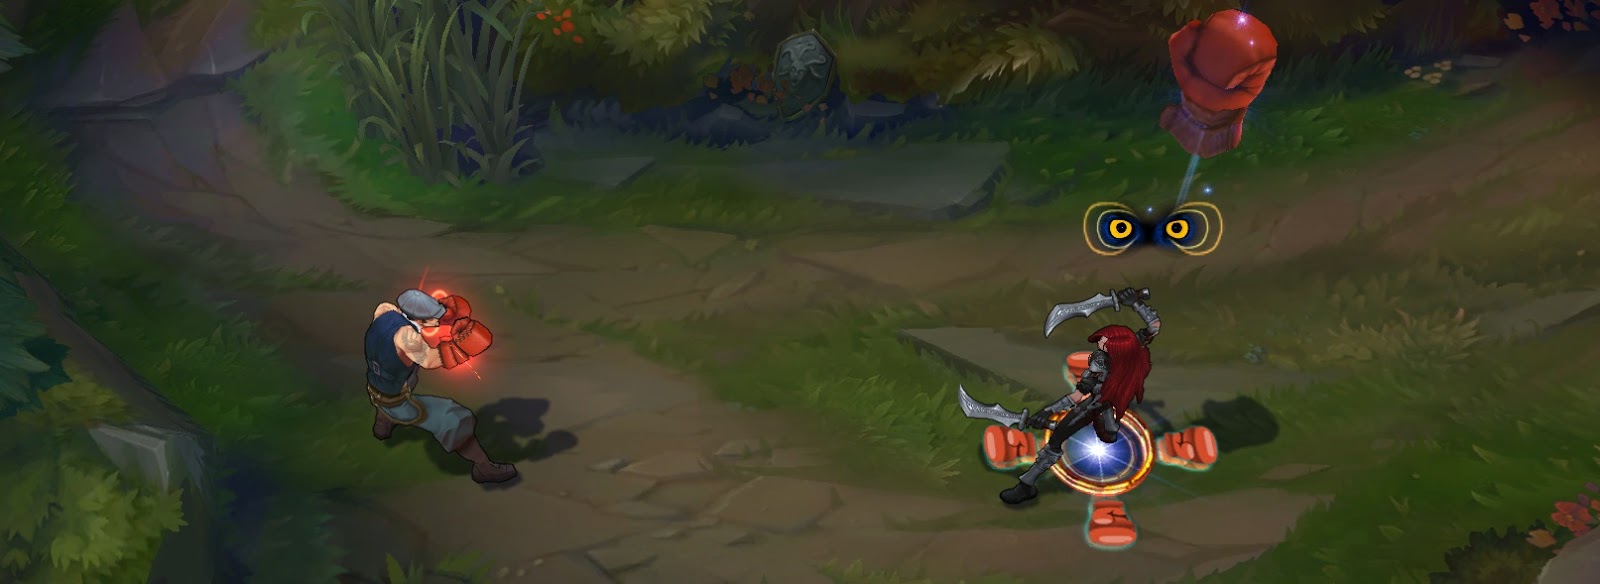 New League Of Legends Skin Turns The Game’s Notorious Monk Into A Boxer